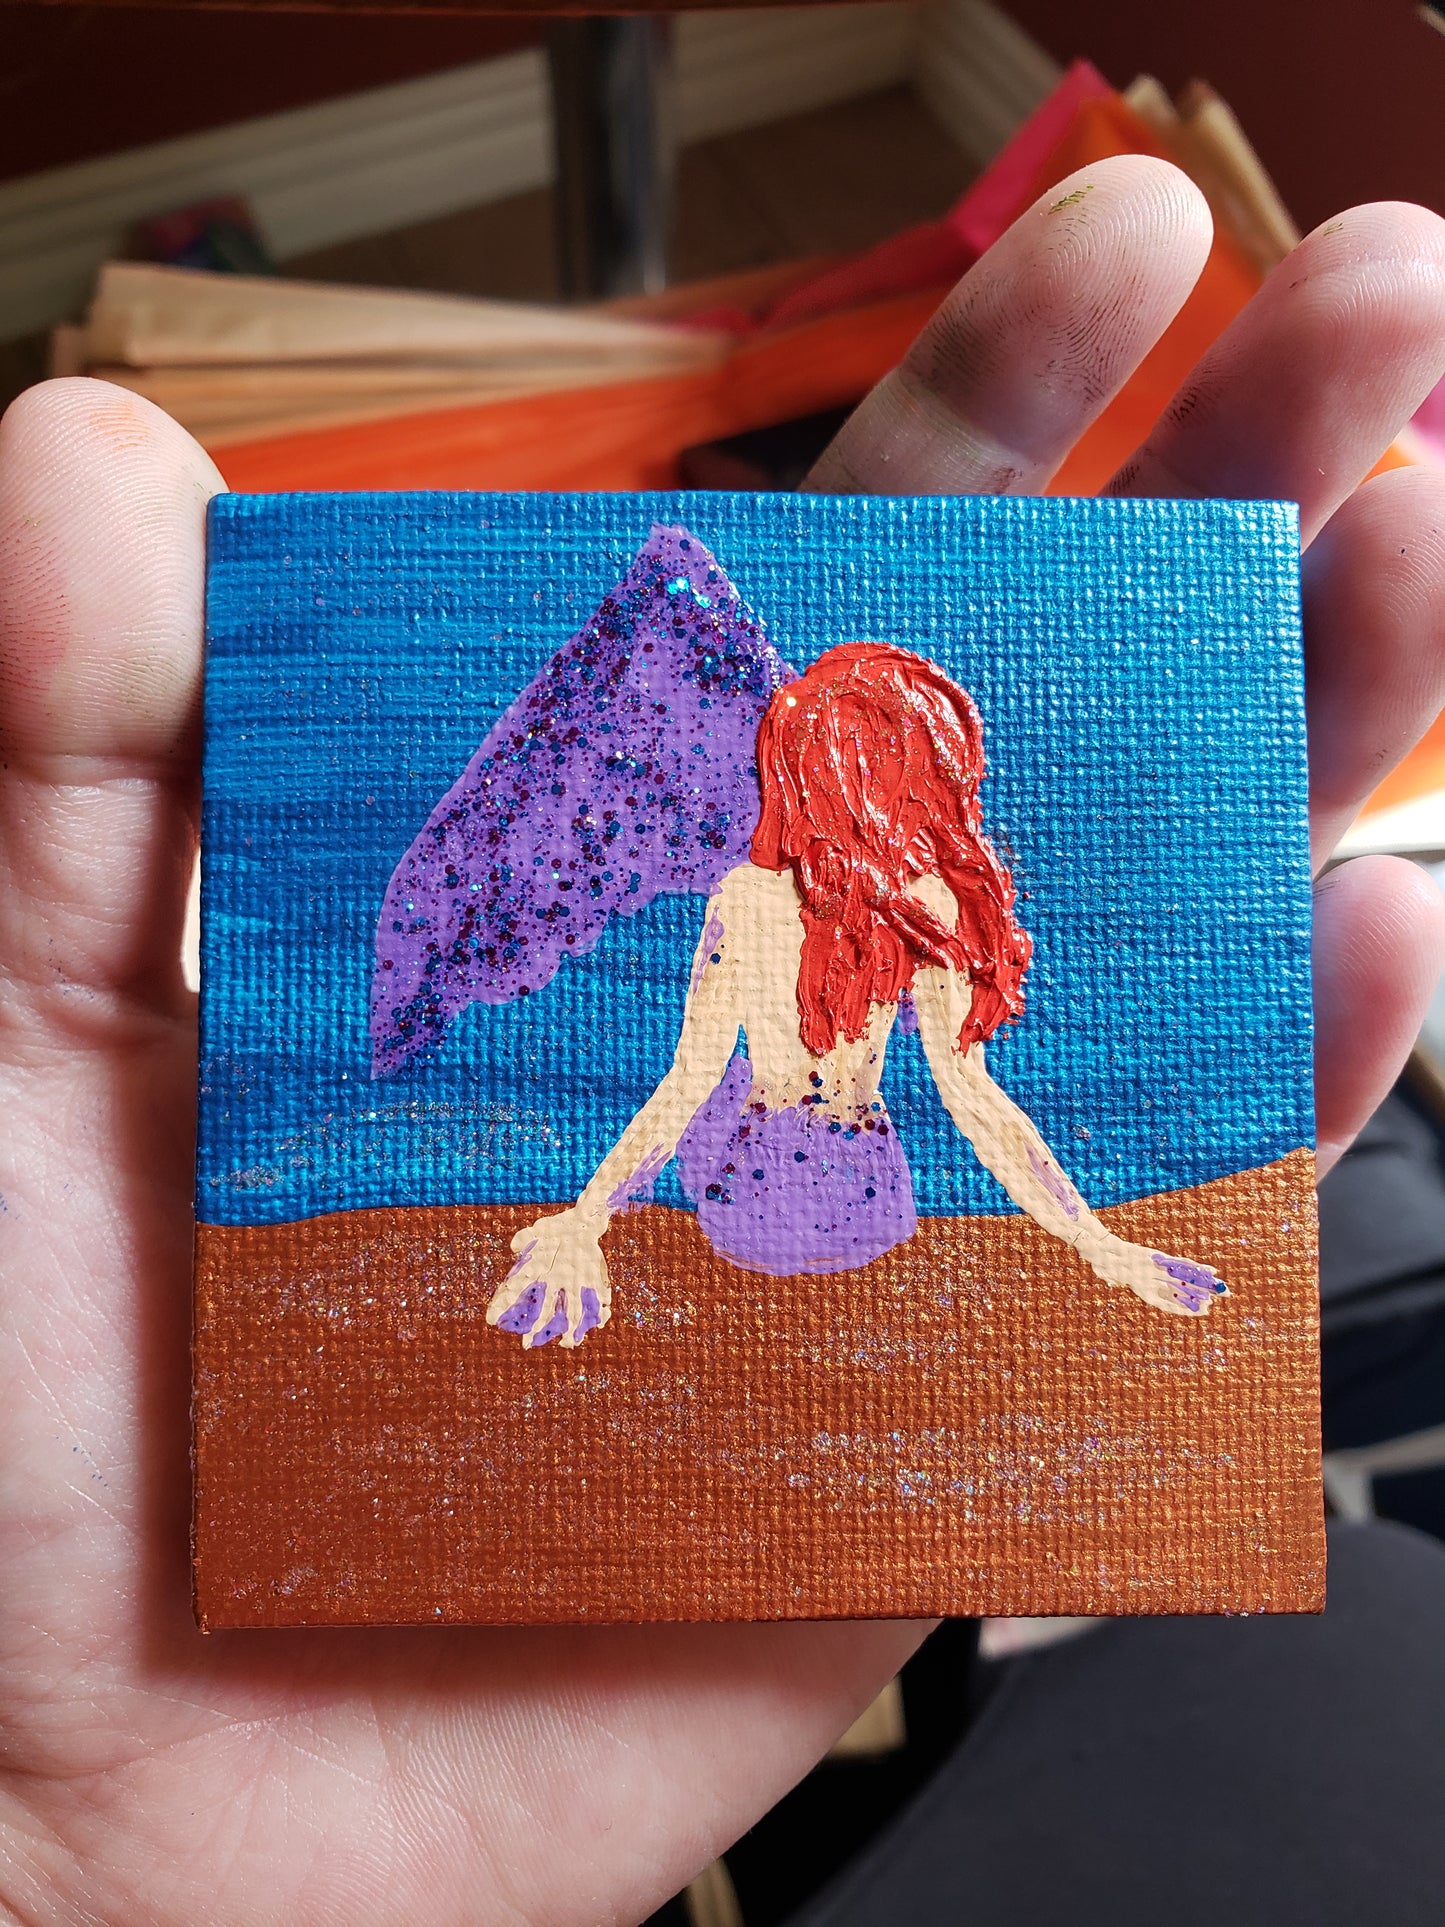 Glittery Mermaid Painting with Easel Red Hair Purple Tail on Sand